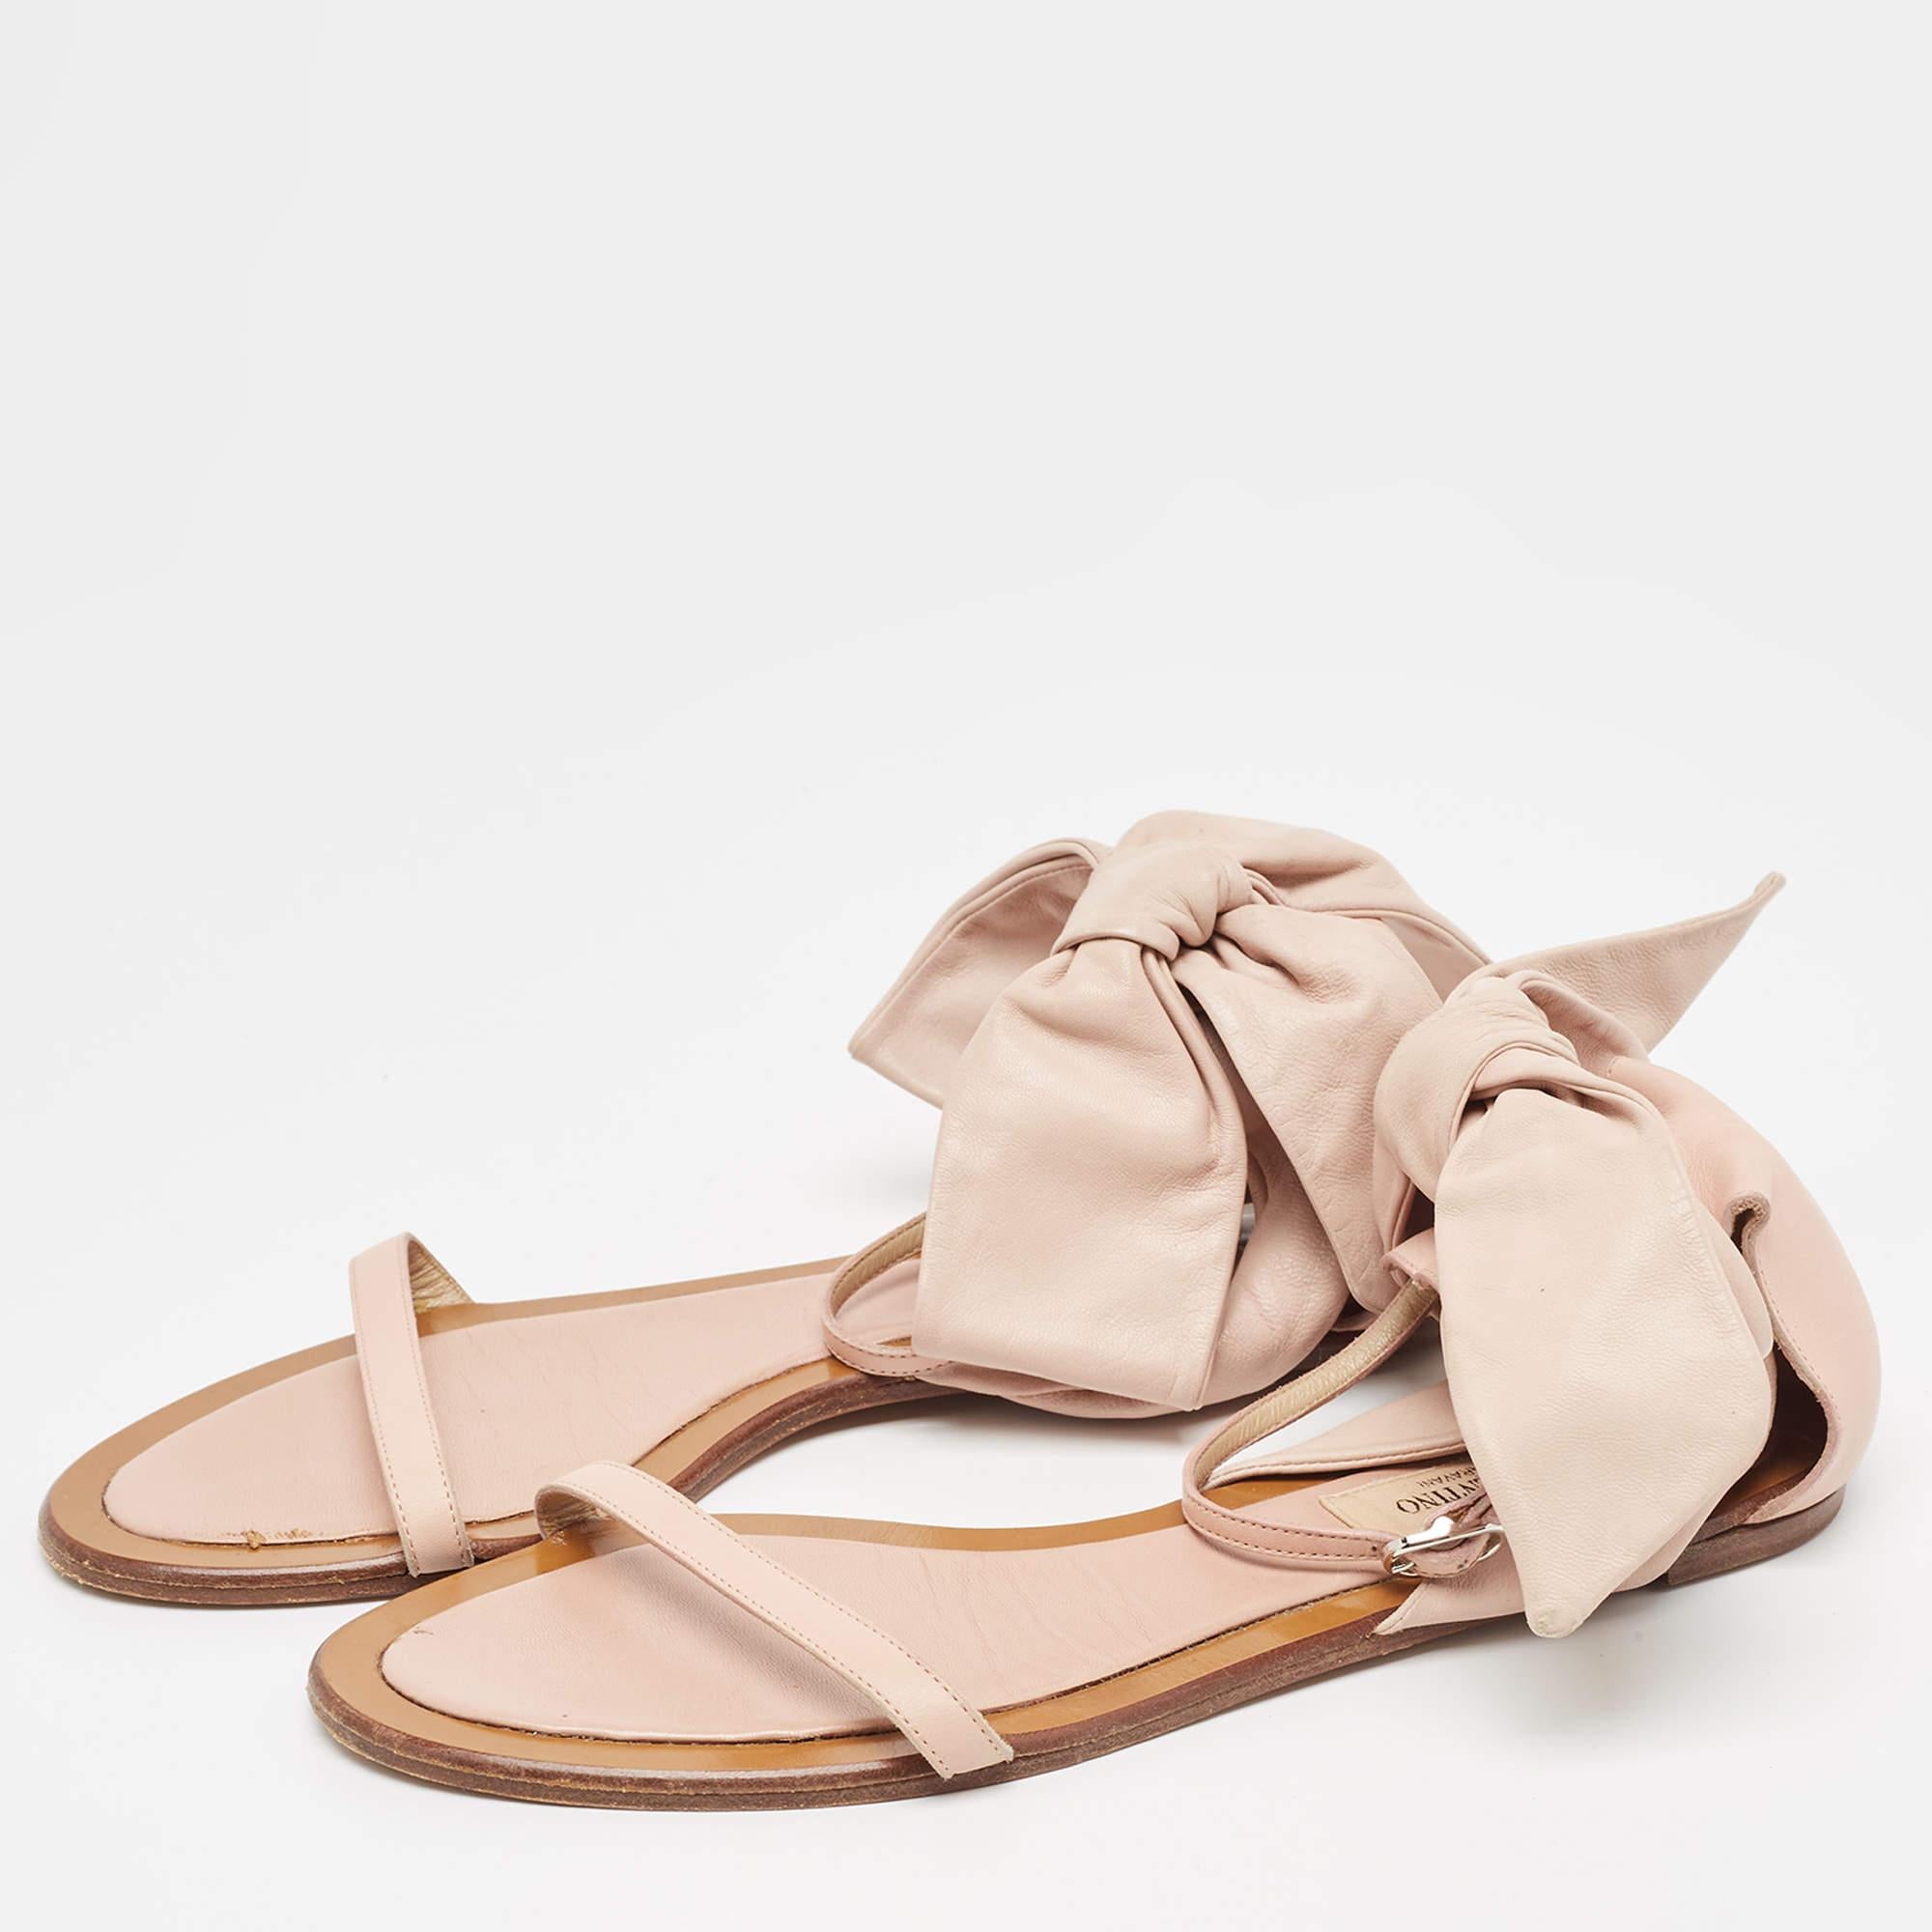 Valentino Pink Leather Leather Ankle Strap Flat Sandals Size 38 In Good Condition For Sale In Dubai, Al Qouz 2